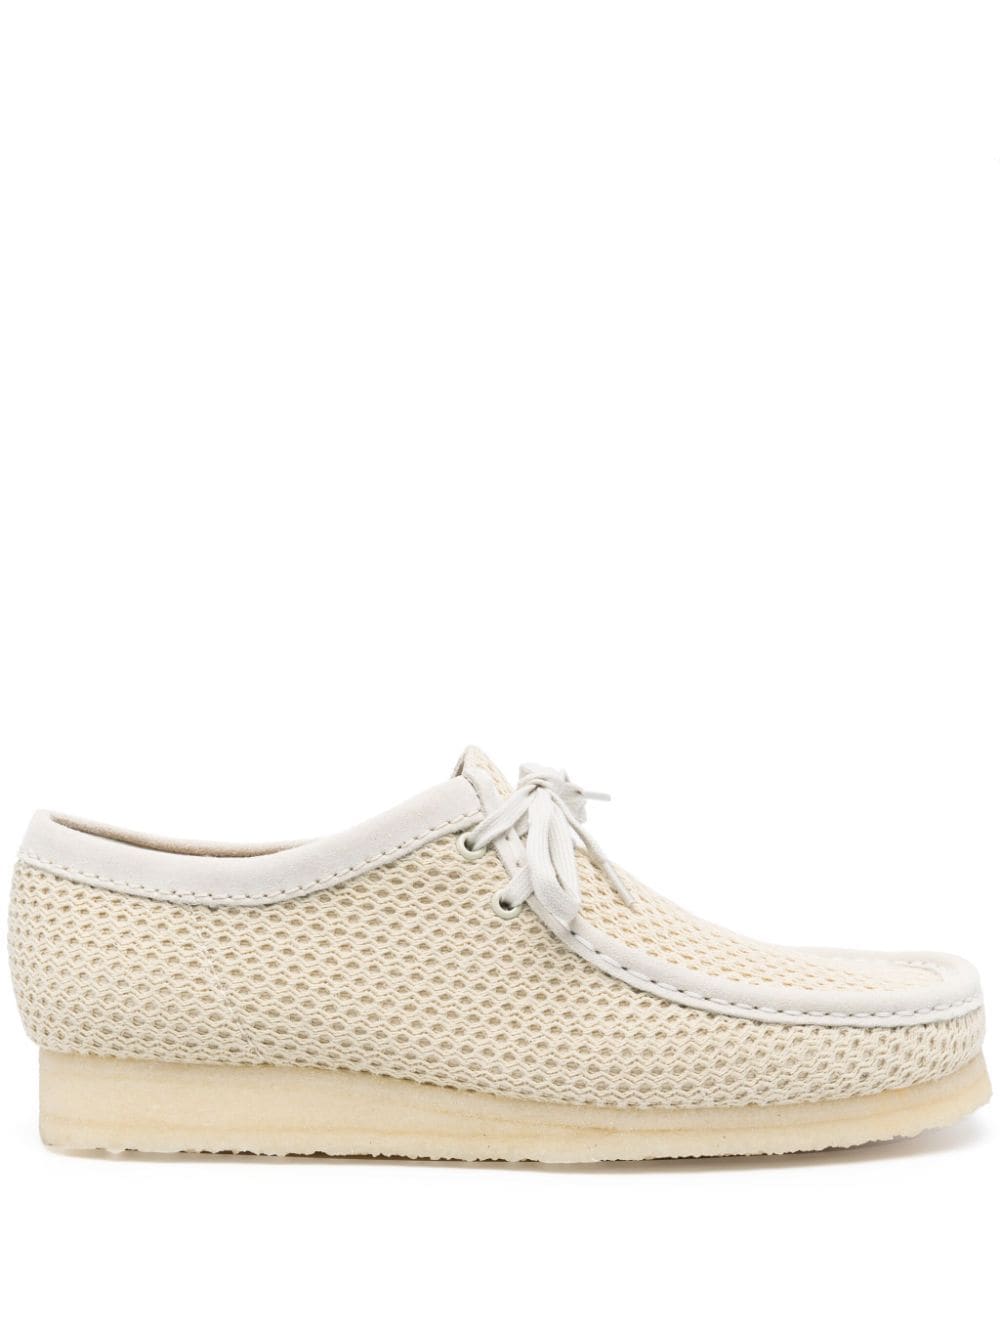 Clarks Wallabee Textured Boat Shoes In Neutrals